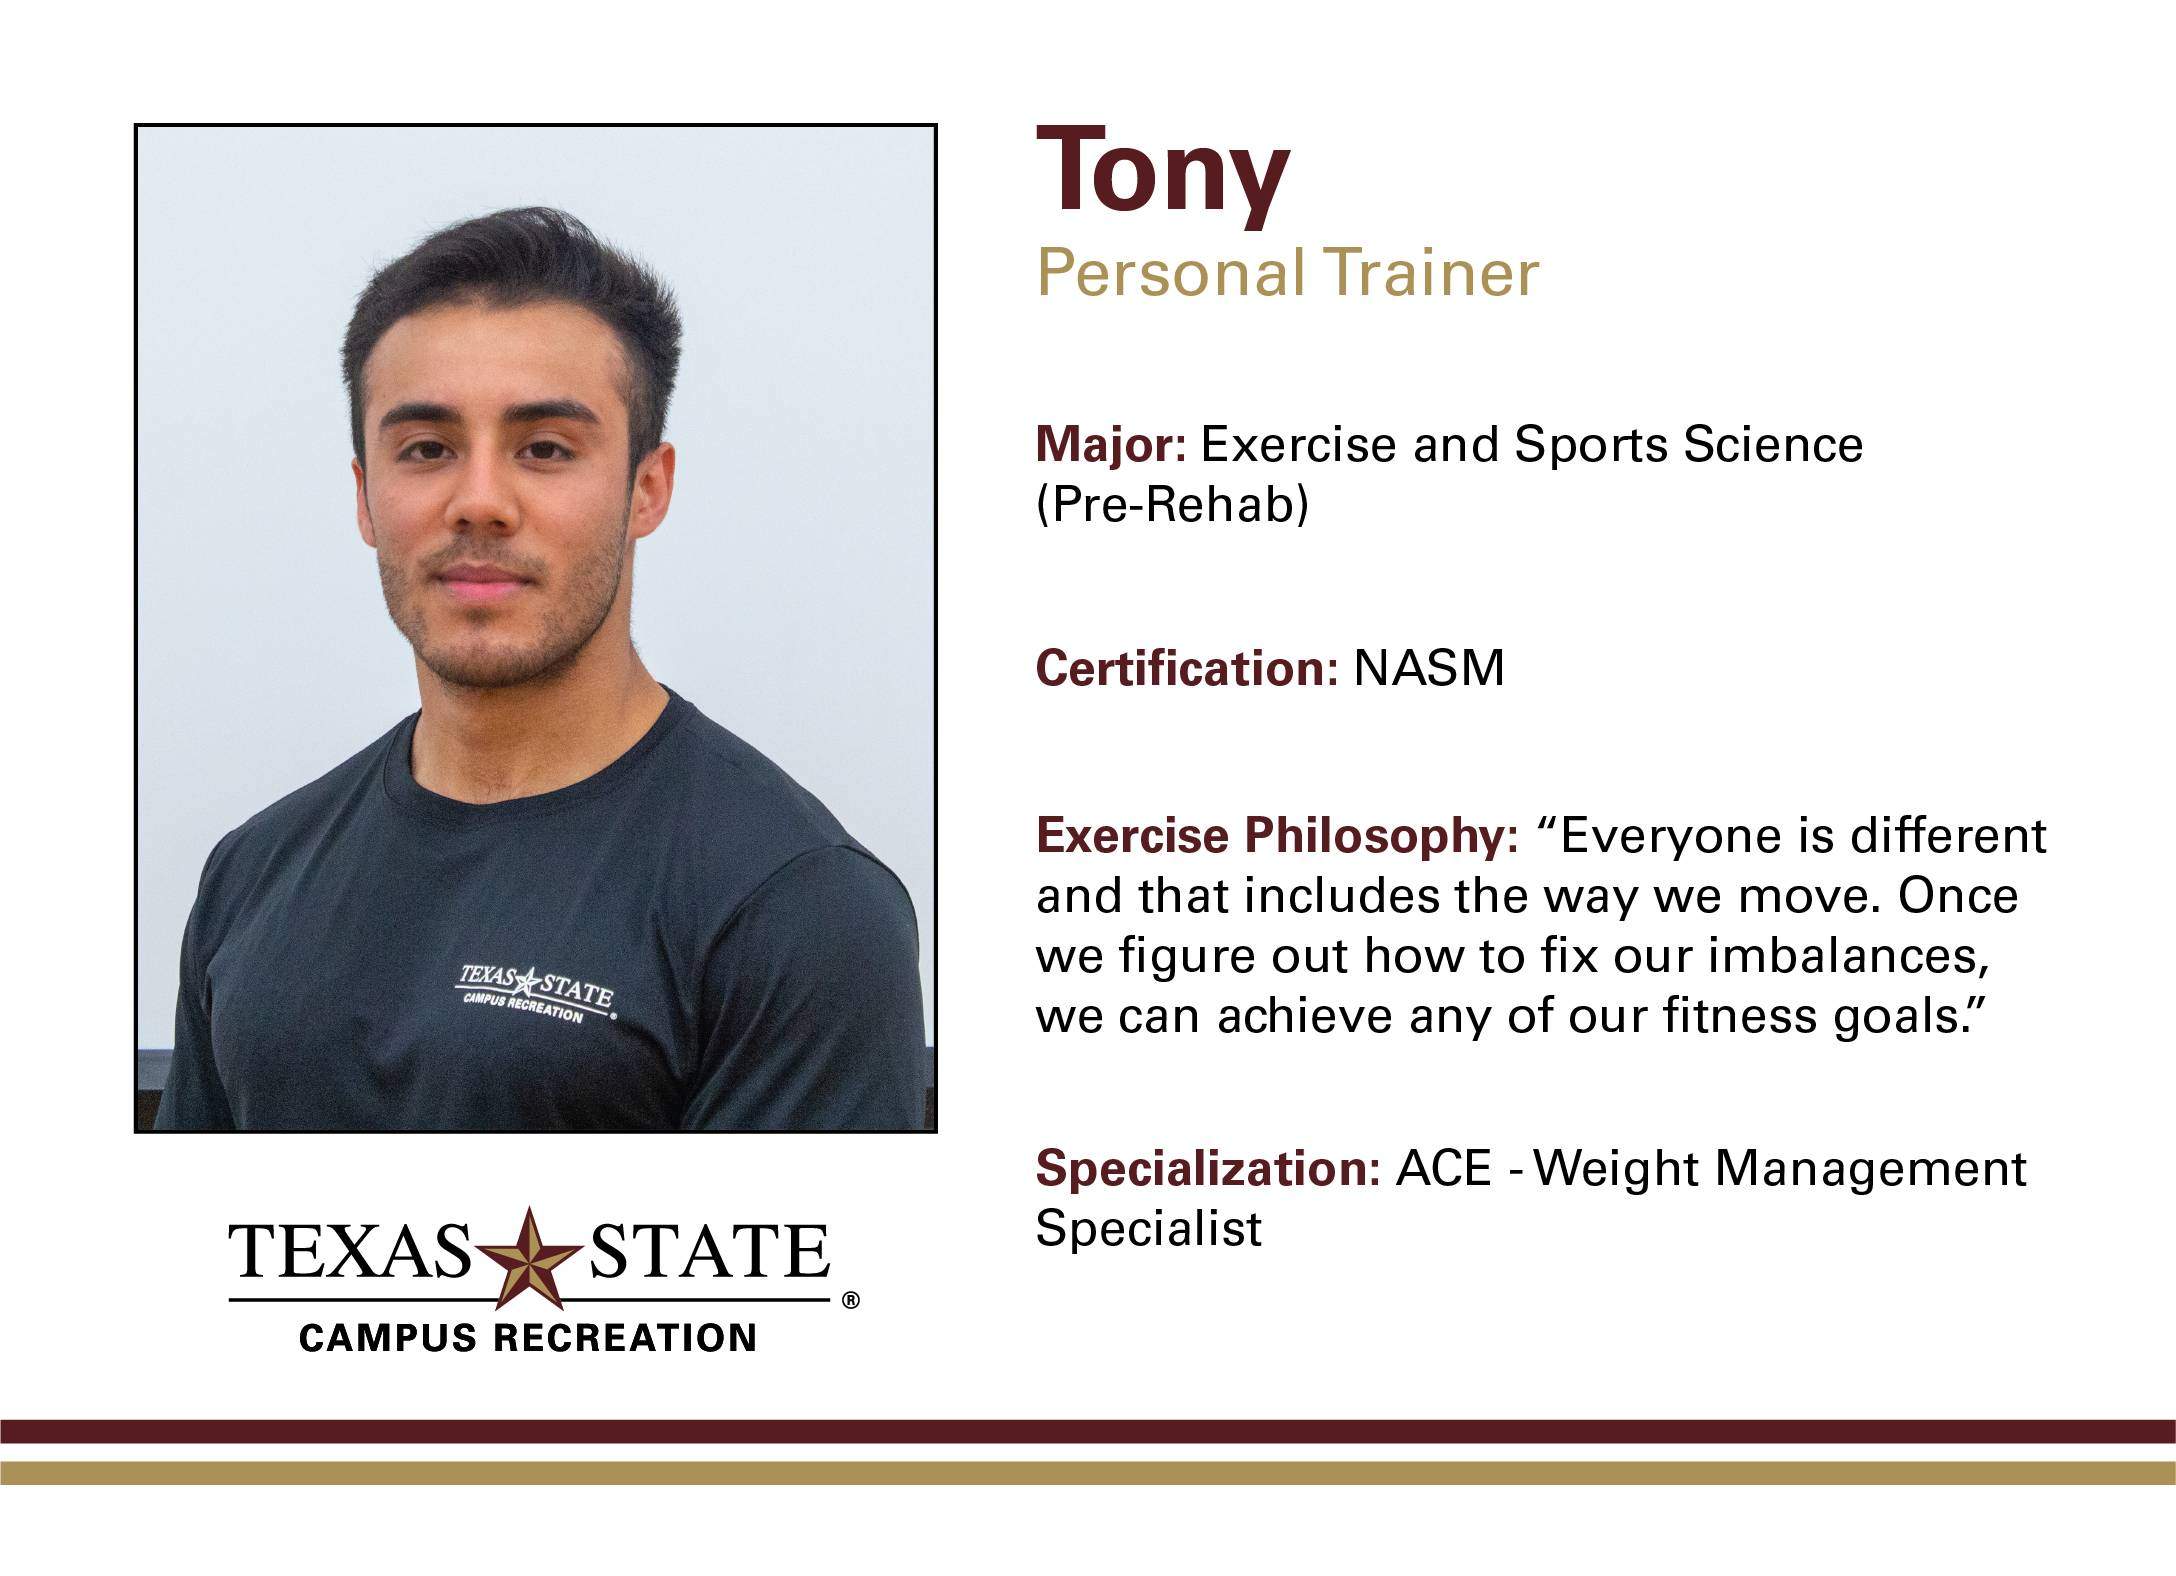 A bio of Tony one of the SRC trainers